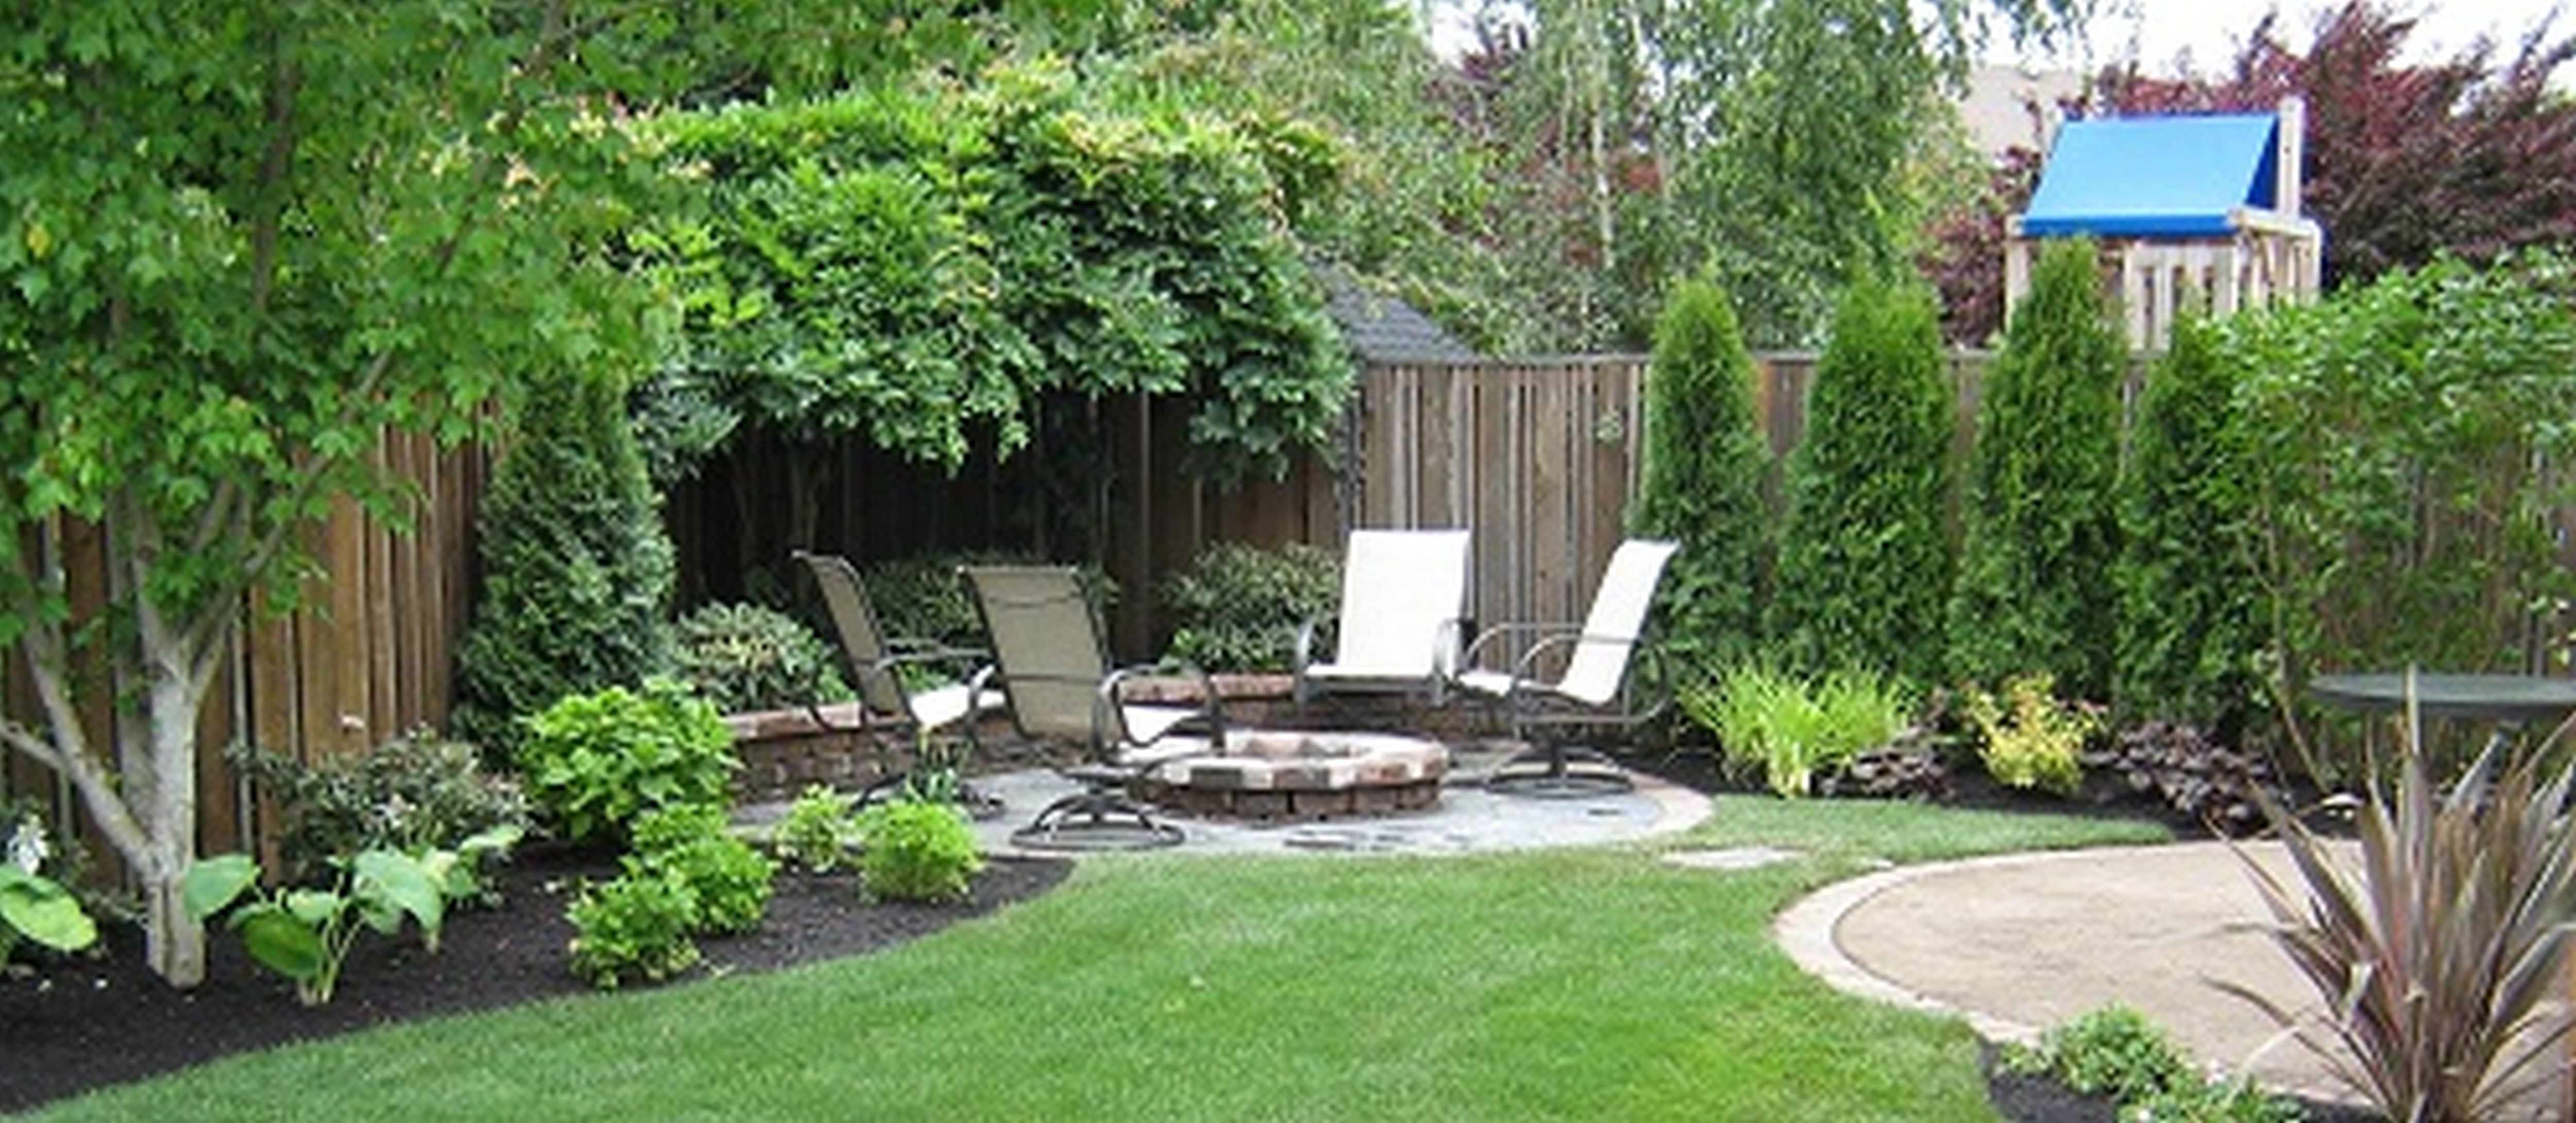 landscaping-ideas